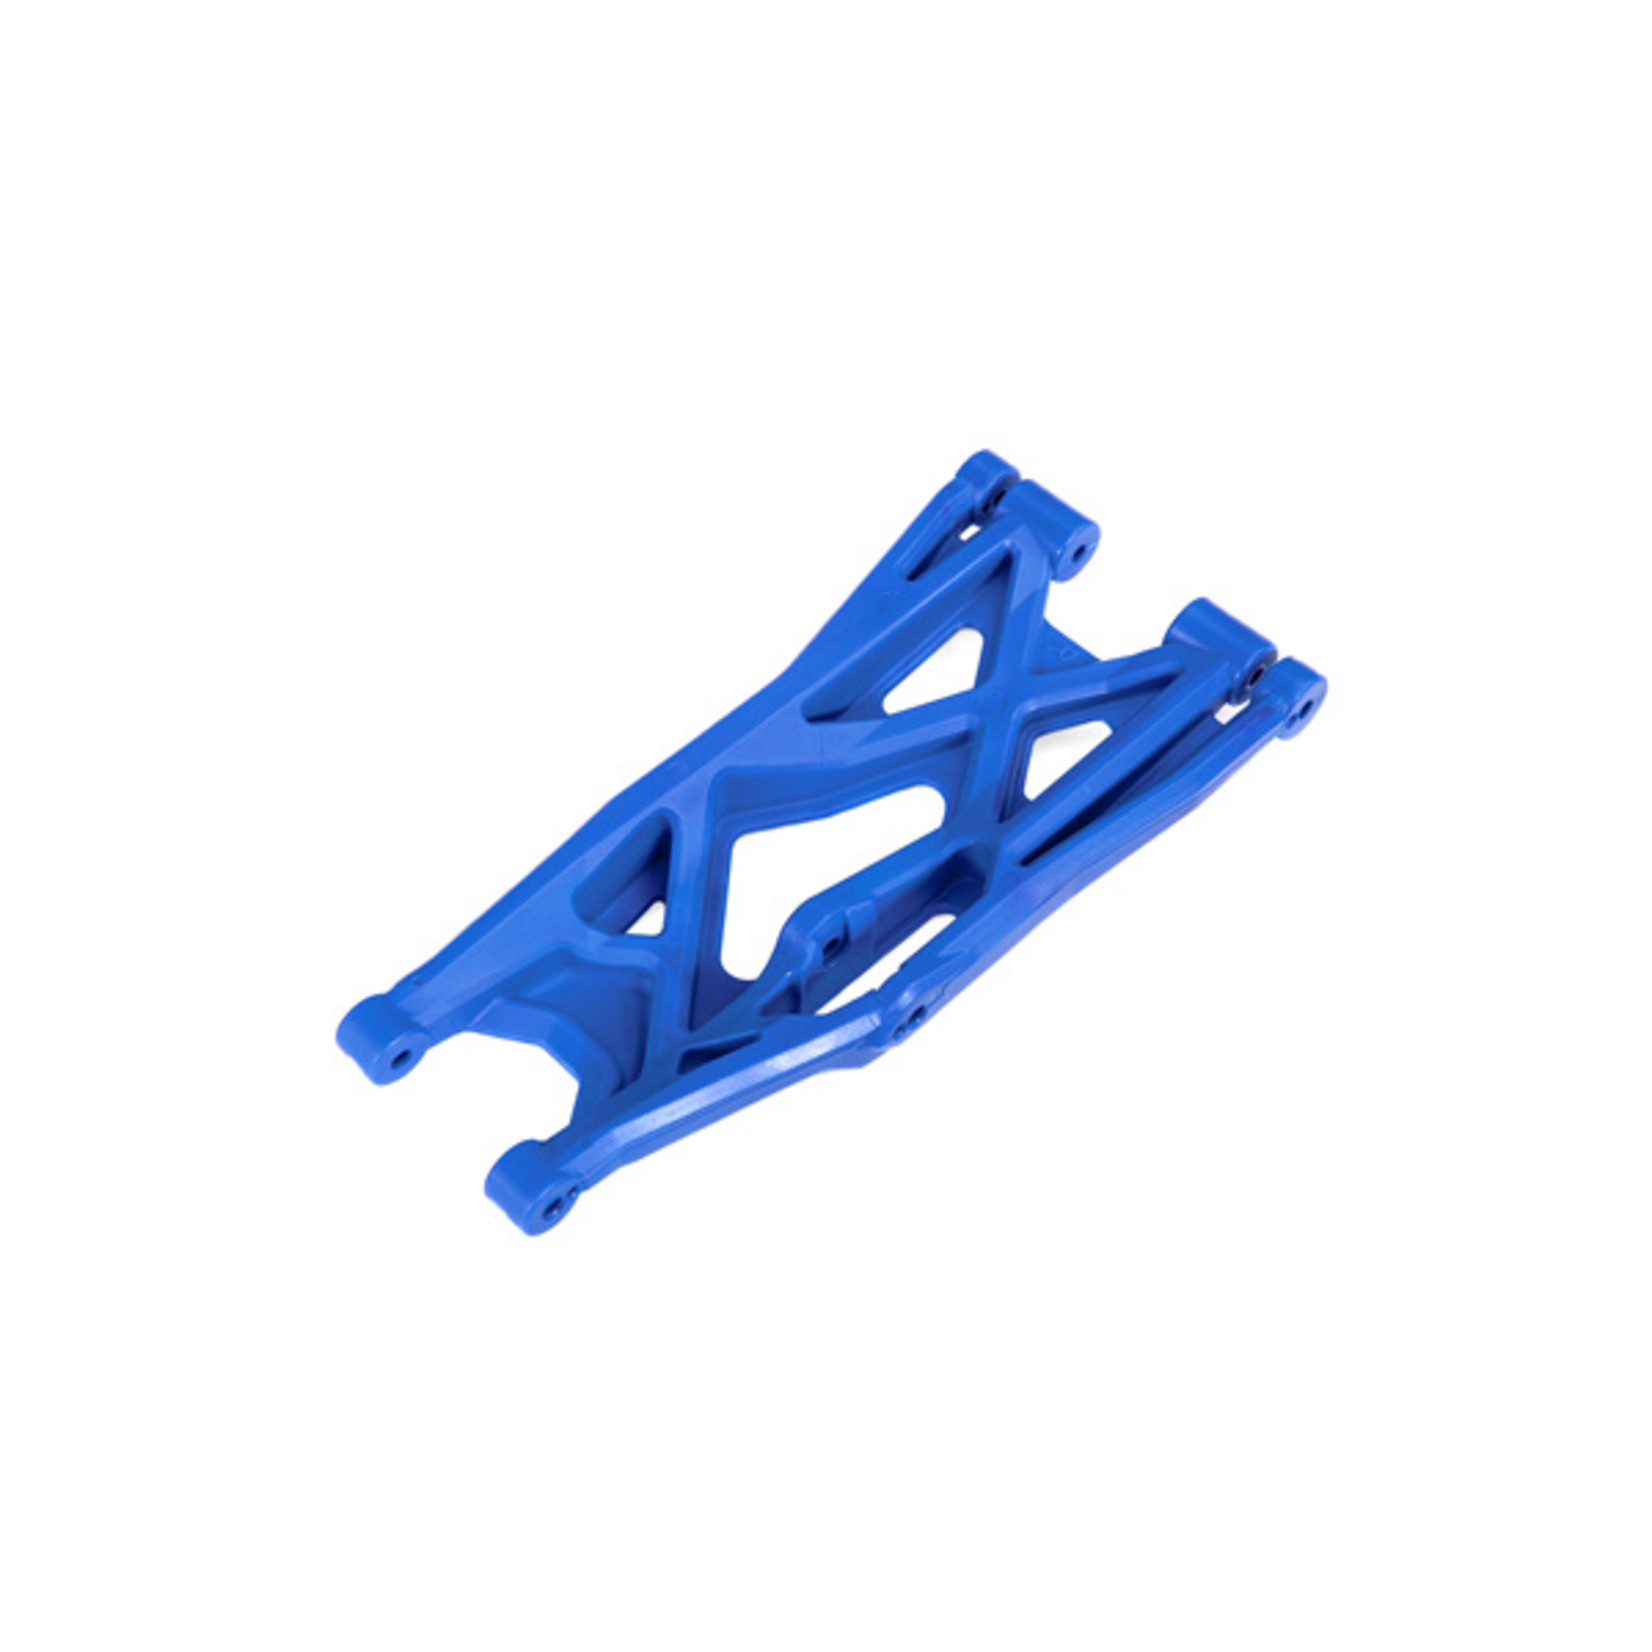 Traxxas 7830X - Suspension arm, blue, lower (right, front